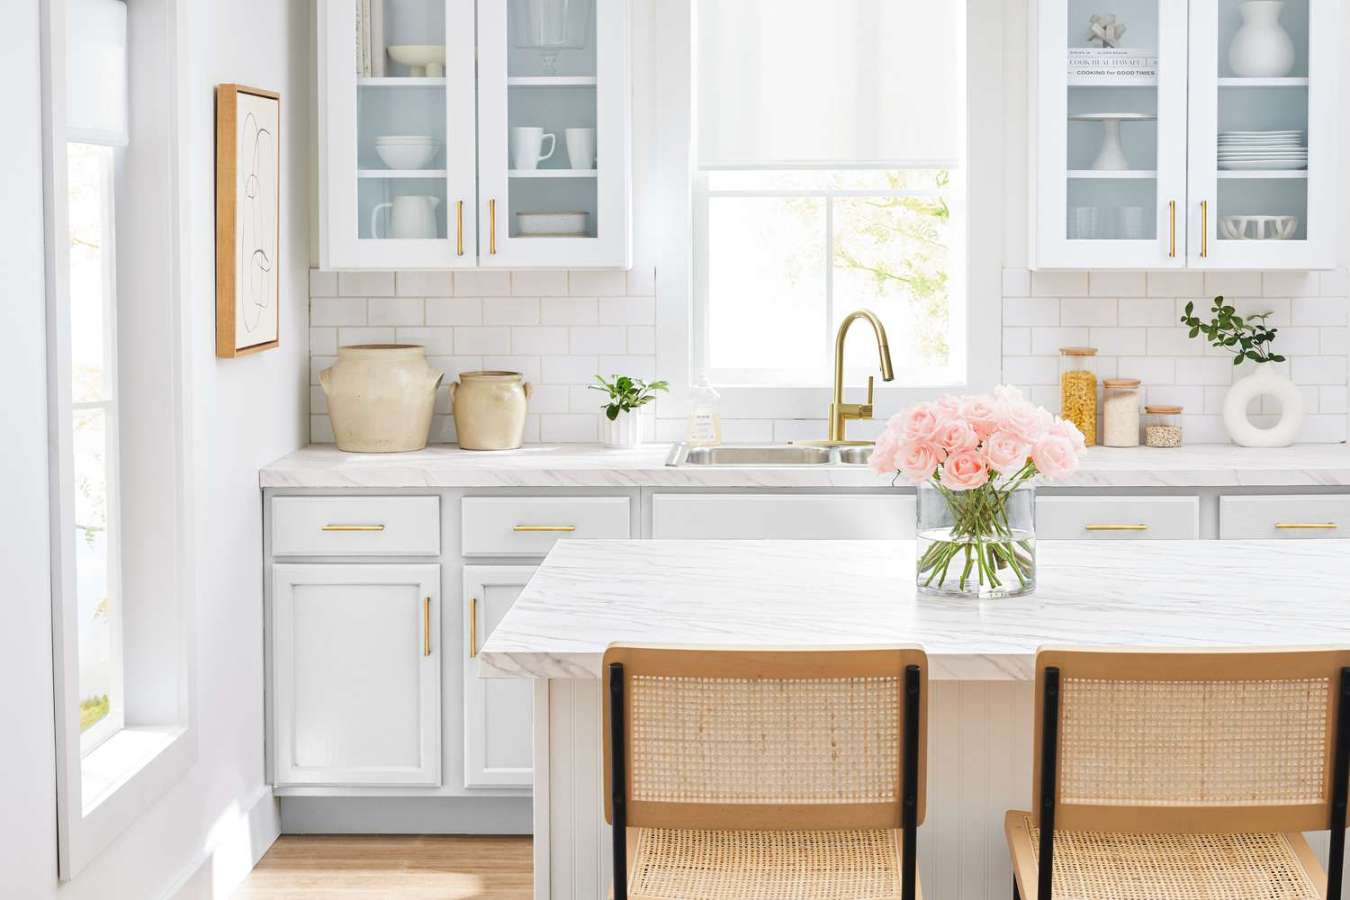 White Kitchen Ideas That Will Never Go Out of Style